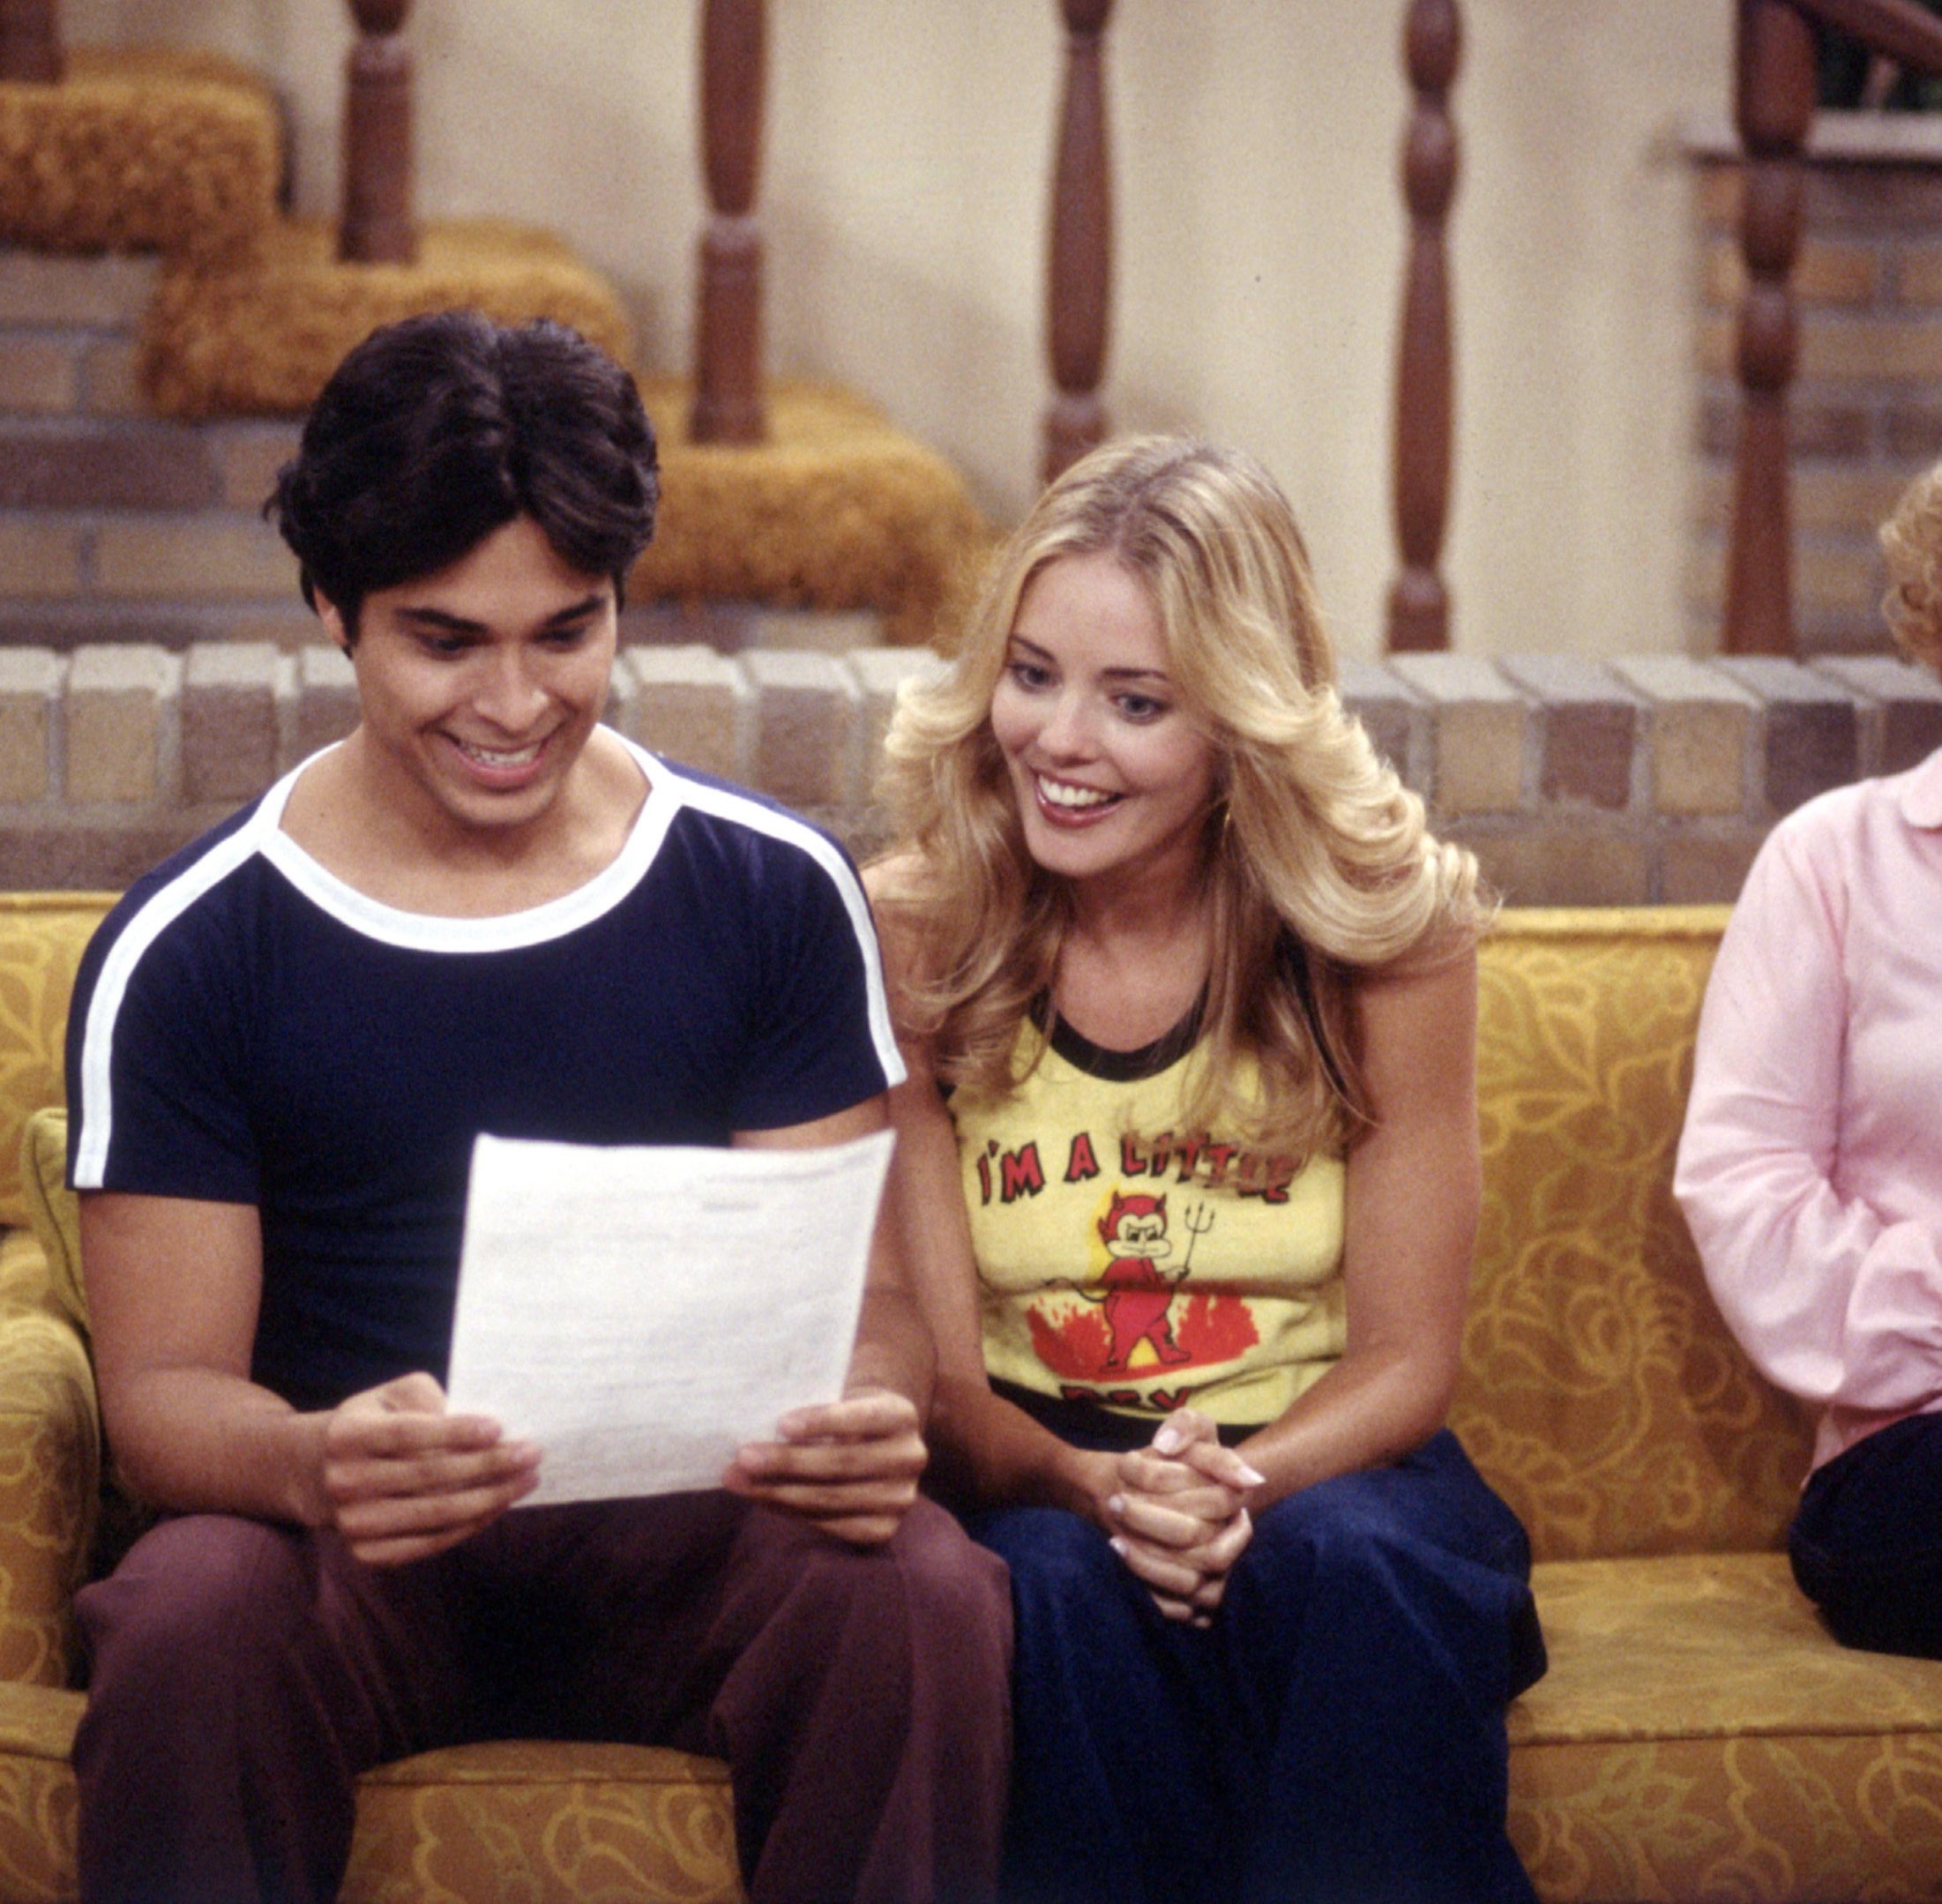 Laurie and Fez looking at a piece of paper and smiling